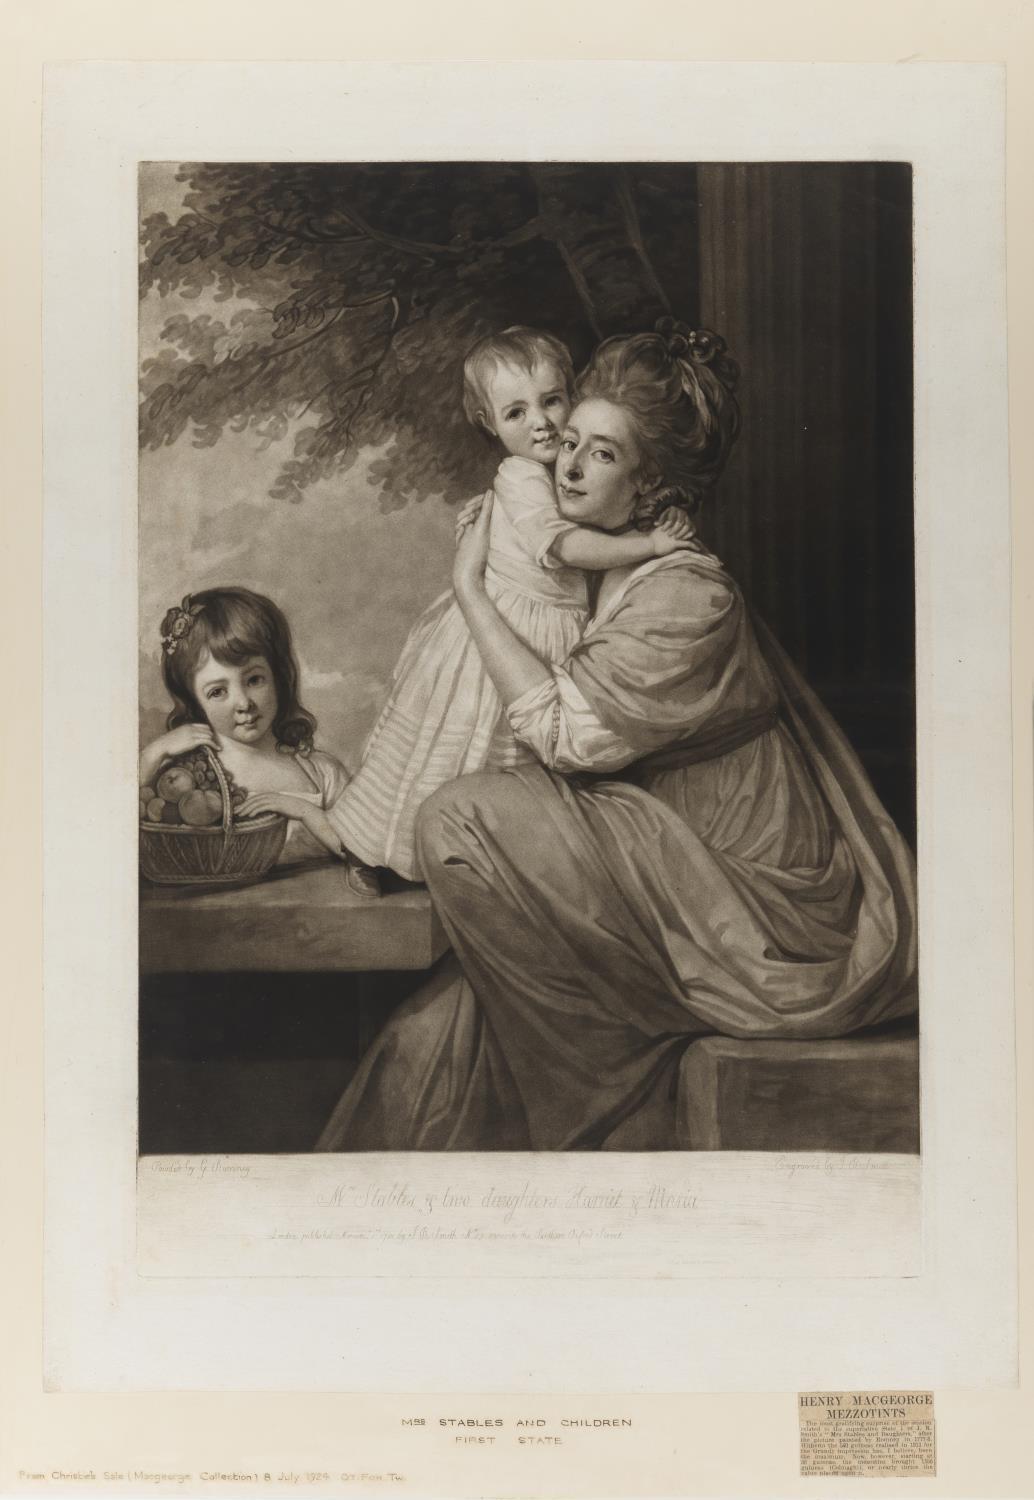 Mrs. Stables and Daughters Harriet and Maria